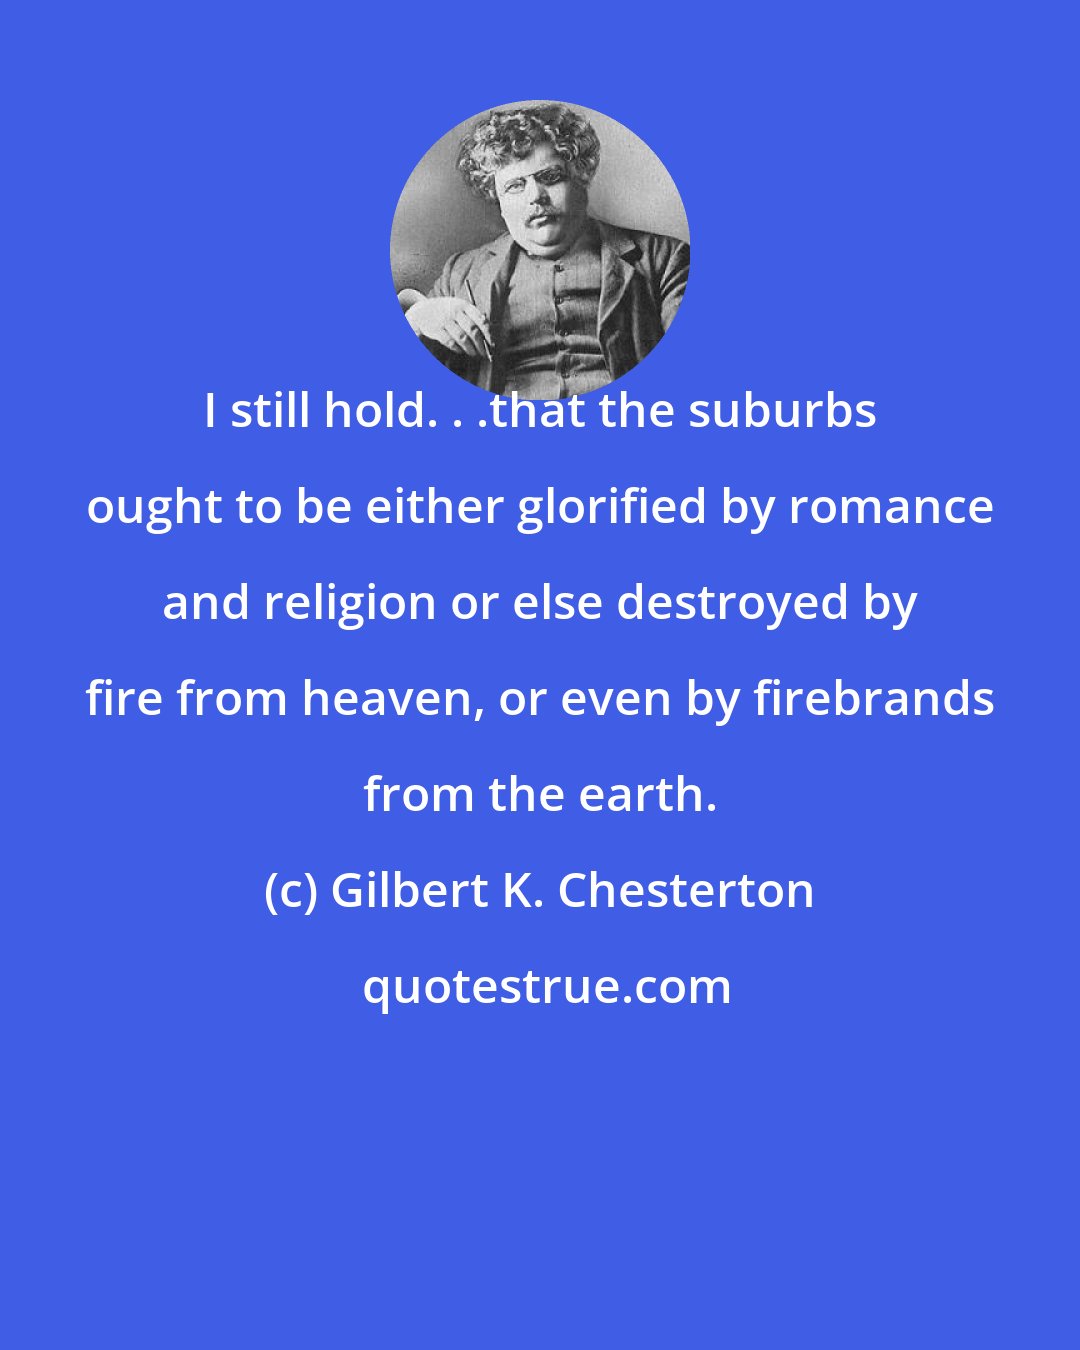 Gilbert K. Chesterton: I still hold. . .that the suburbs ought to be either glorified by romance and religion or else destroyed by fire from heaven, or even by firebrands from the earth.